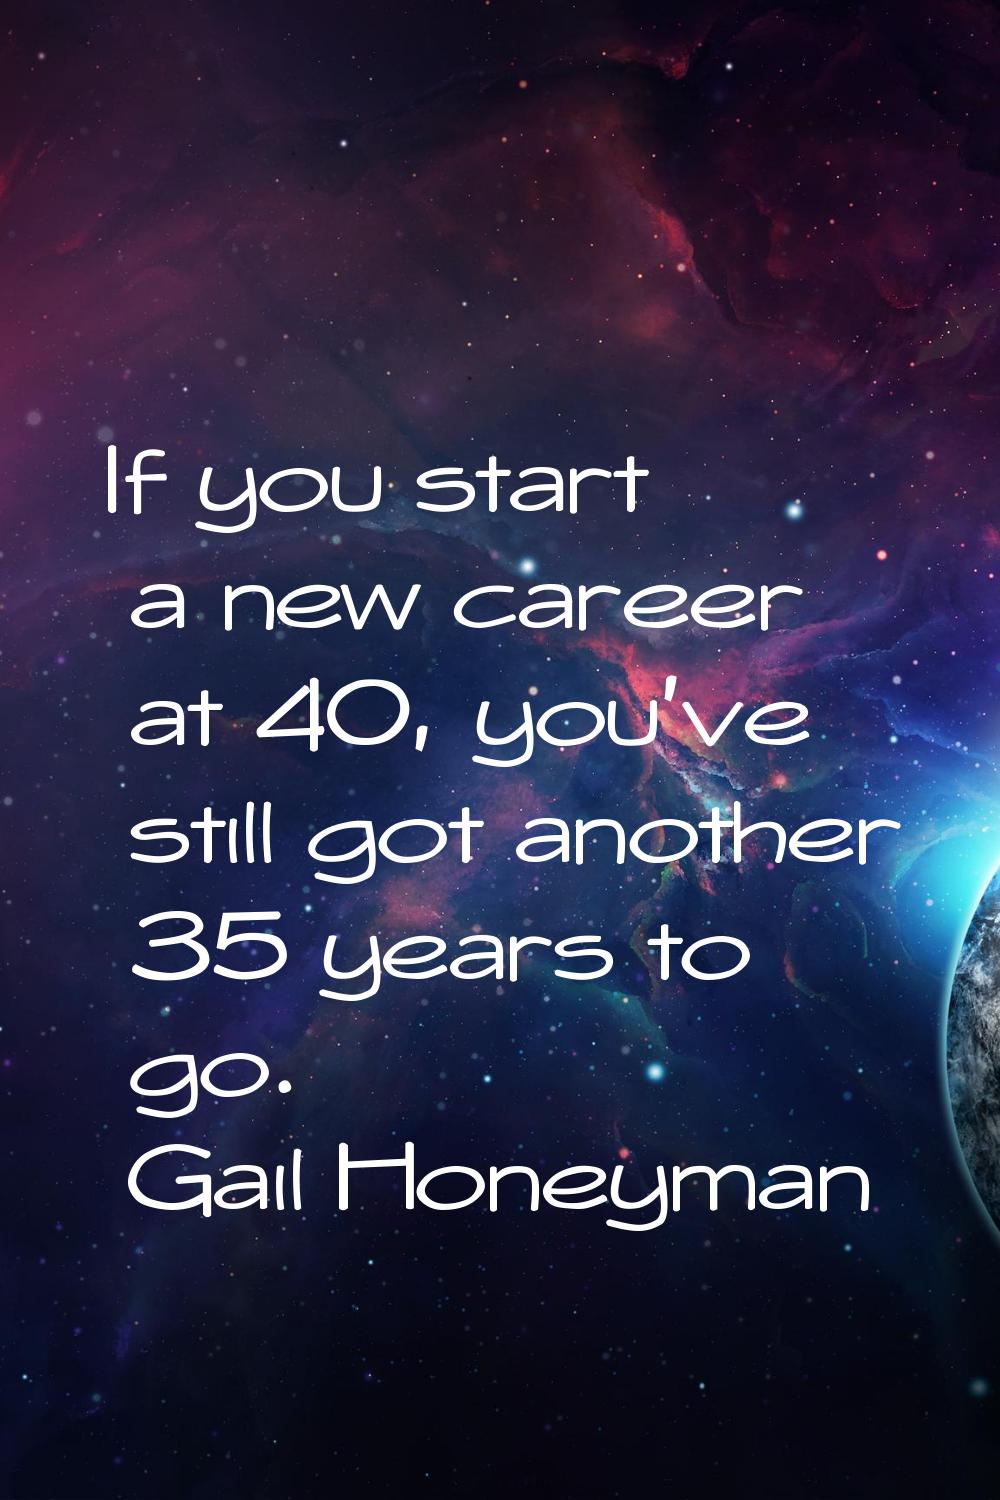 If you start a new career at 40, you've still got another 35 years to go.